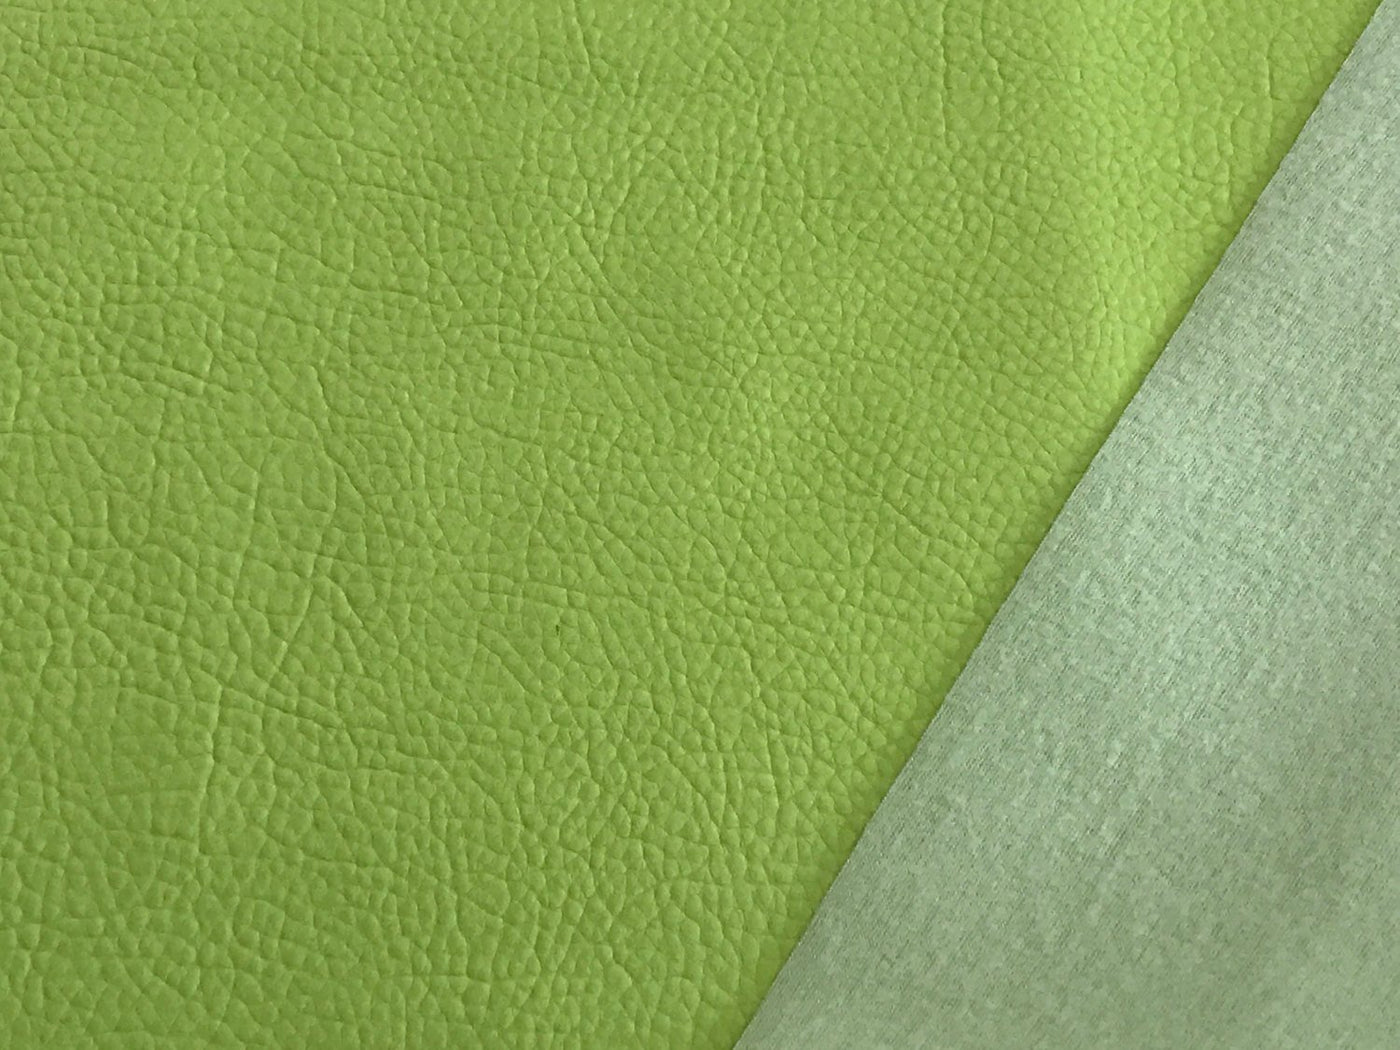 Light Apple Green Leatherette Sheet  A4  8X11,  A5 Size Green Faux Leather Fabric Big Lychee Pattern PU Leather Thin Leatherette